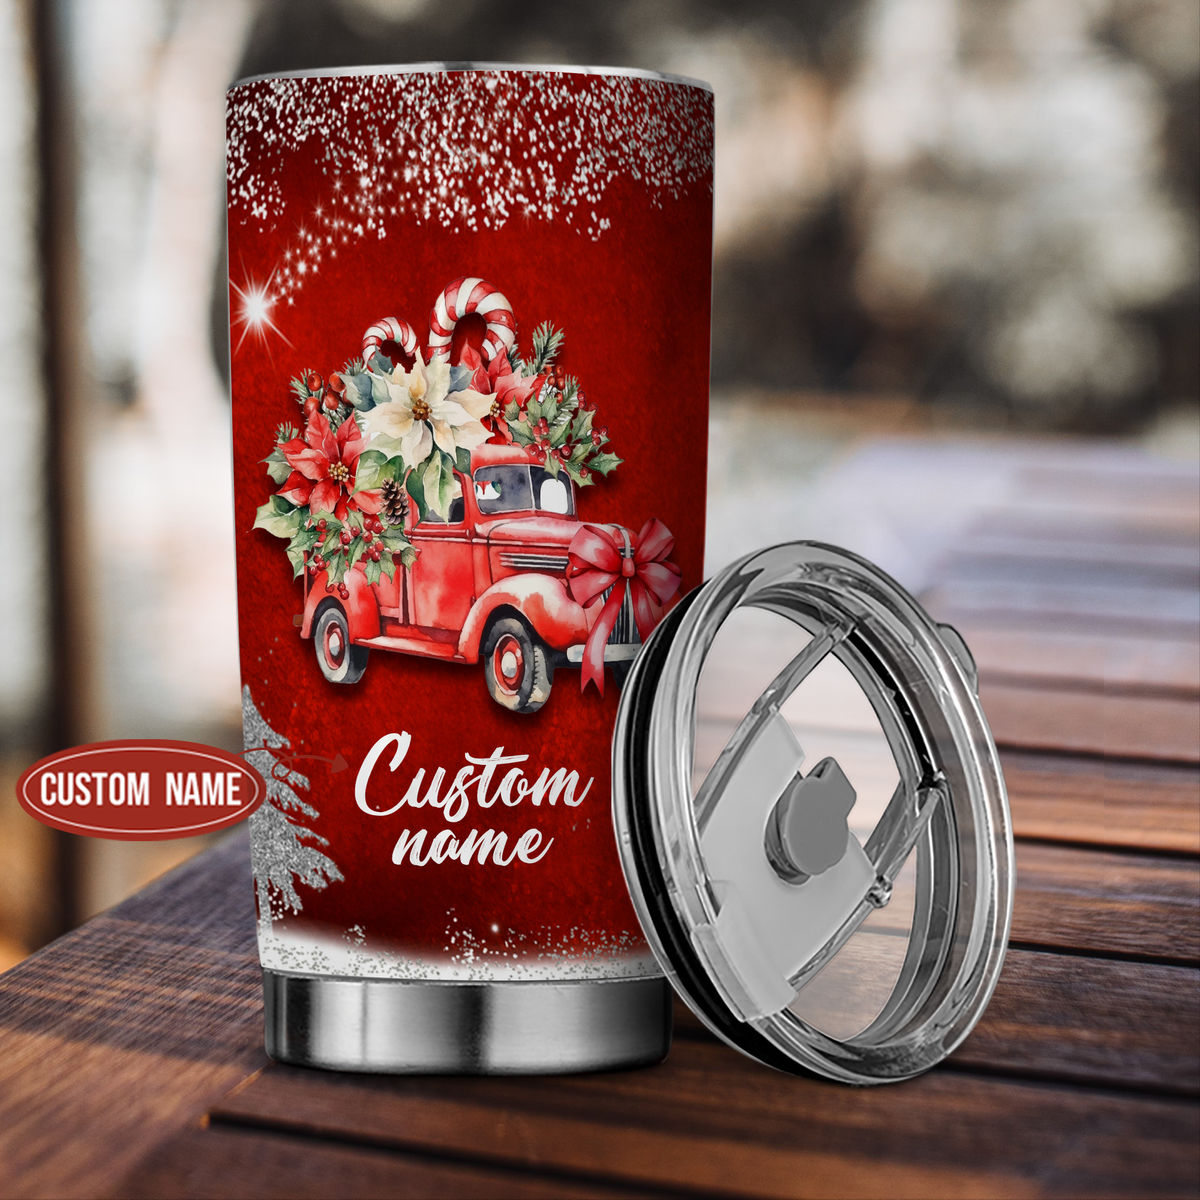  MERRY CHRISTMAS Red 30 oz Tumbler With Straw and Slide Top Lid, Stainless Steel Travel Mug